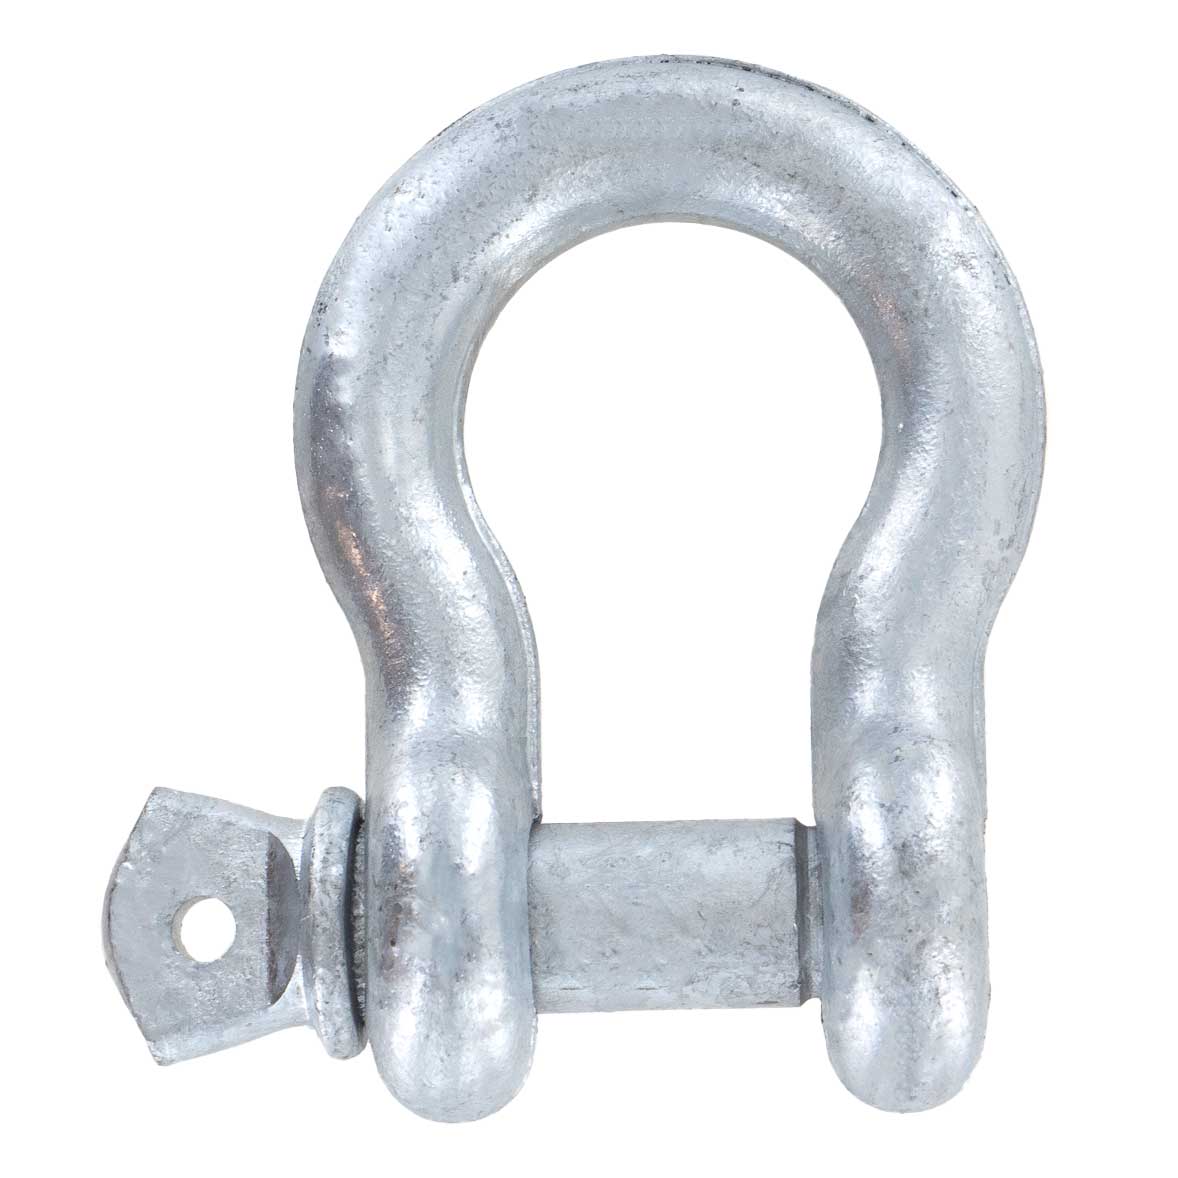 1/2" Galvanized Screw Pin Anchor Shackle - 2 Ton rear view